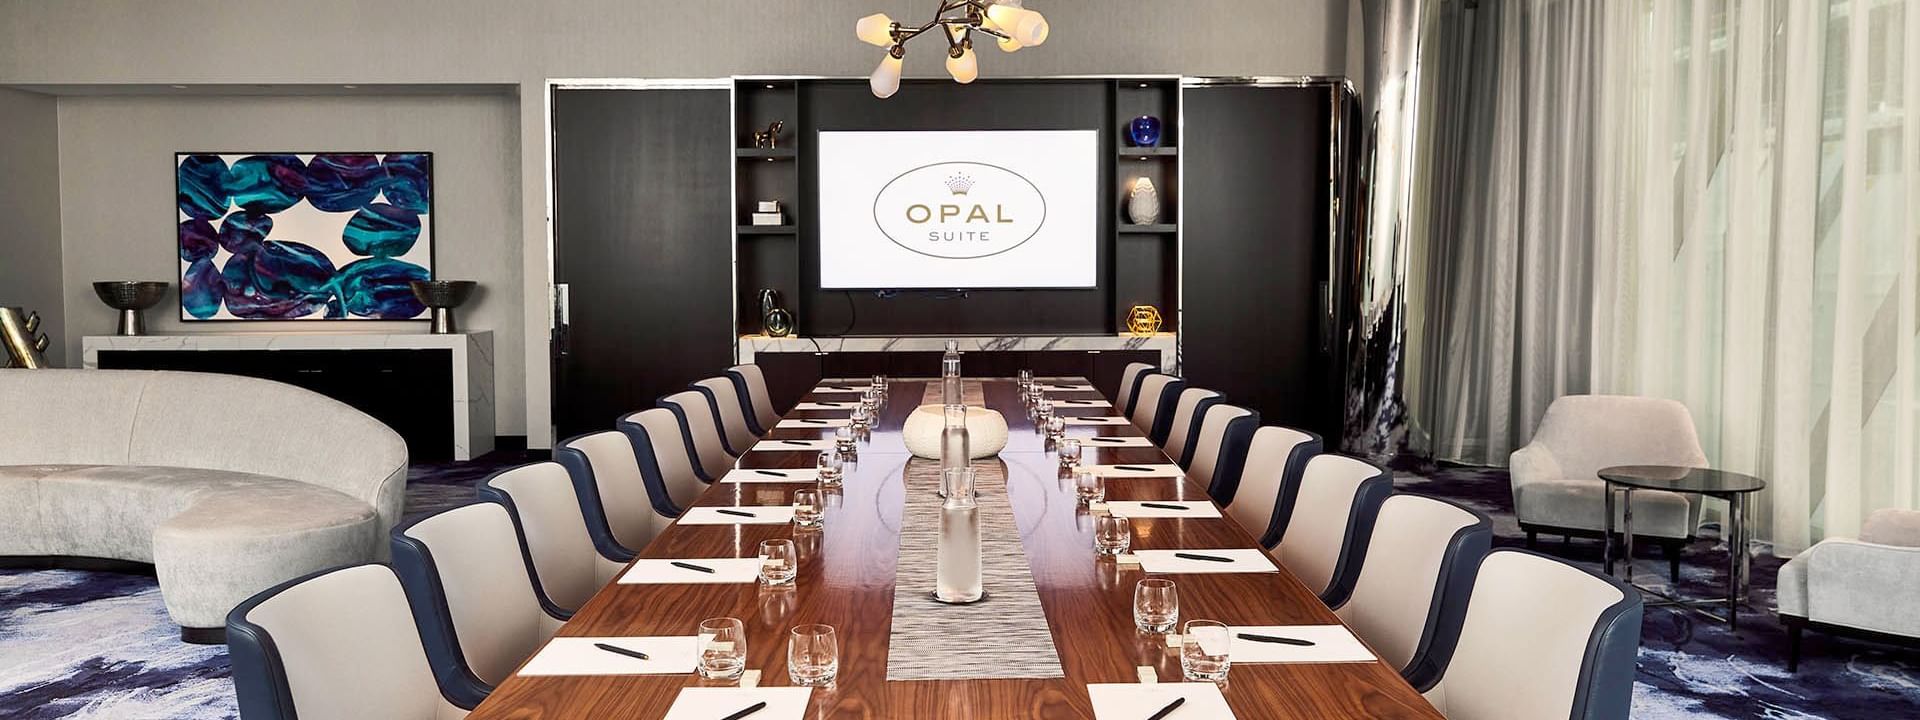 Boardroom set-up in Opal Suite at Crown Towers Sydney